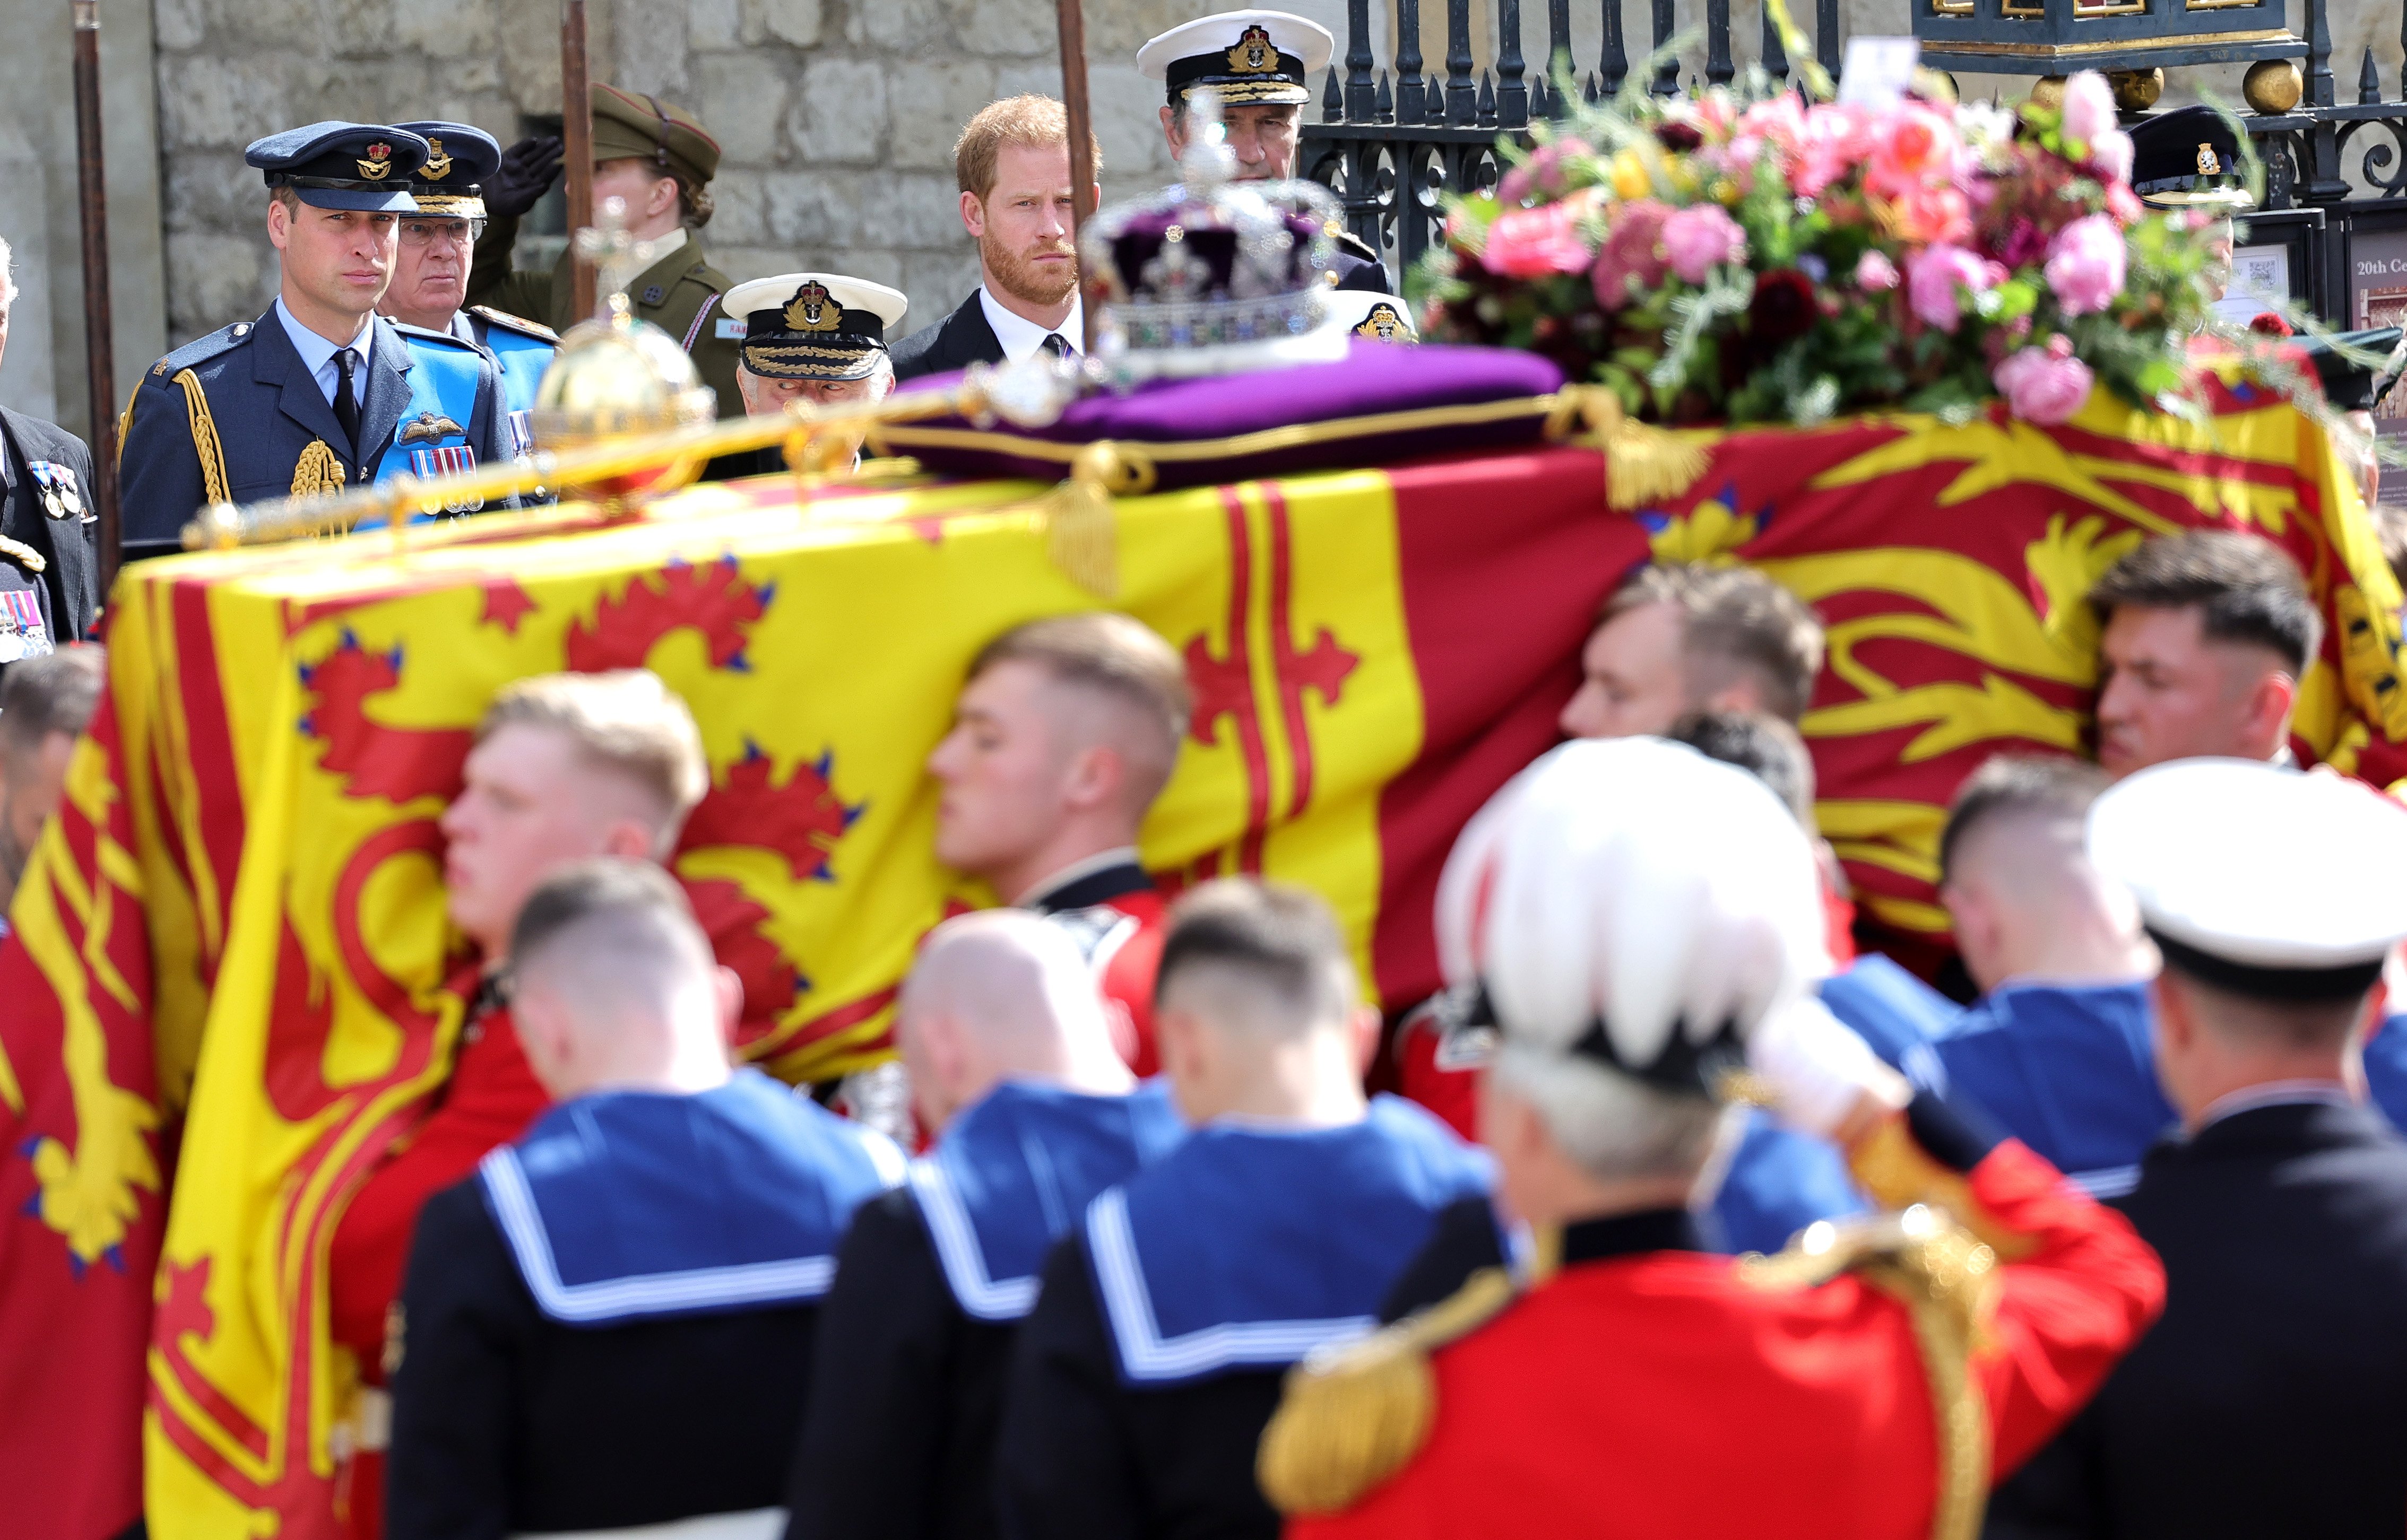 Prince William, Prince of Wales, King Charles III and Prince Harry, Duke of Sussex watch the coffin of HM Queen Elizabeth during The State Funeral Of Queen Elizabeth II at Westminster Abbey on September 19, 2022 in London, England. | Source: Getty Images